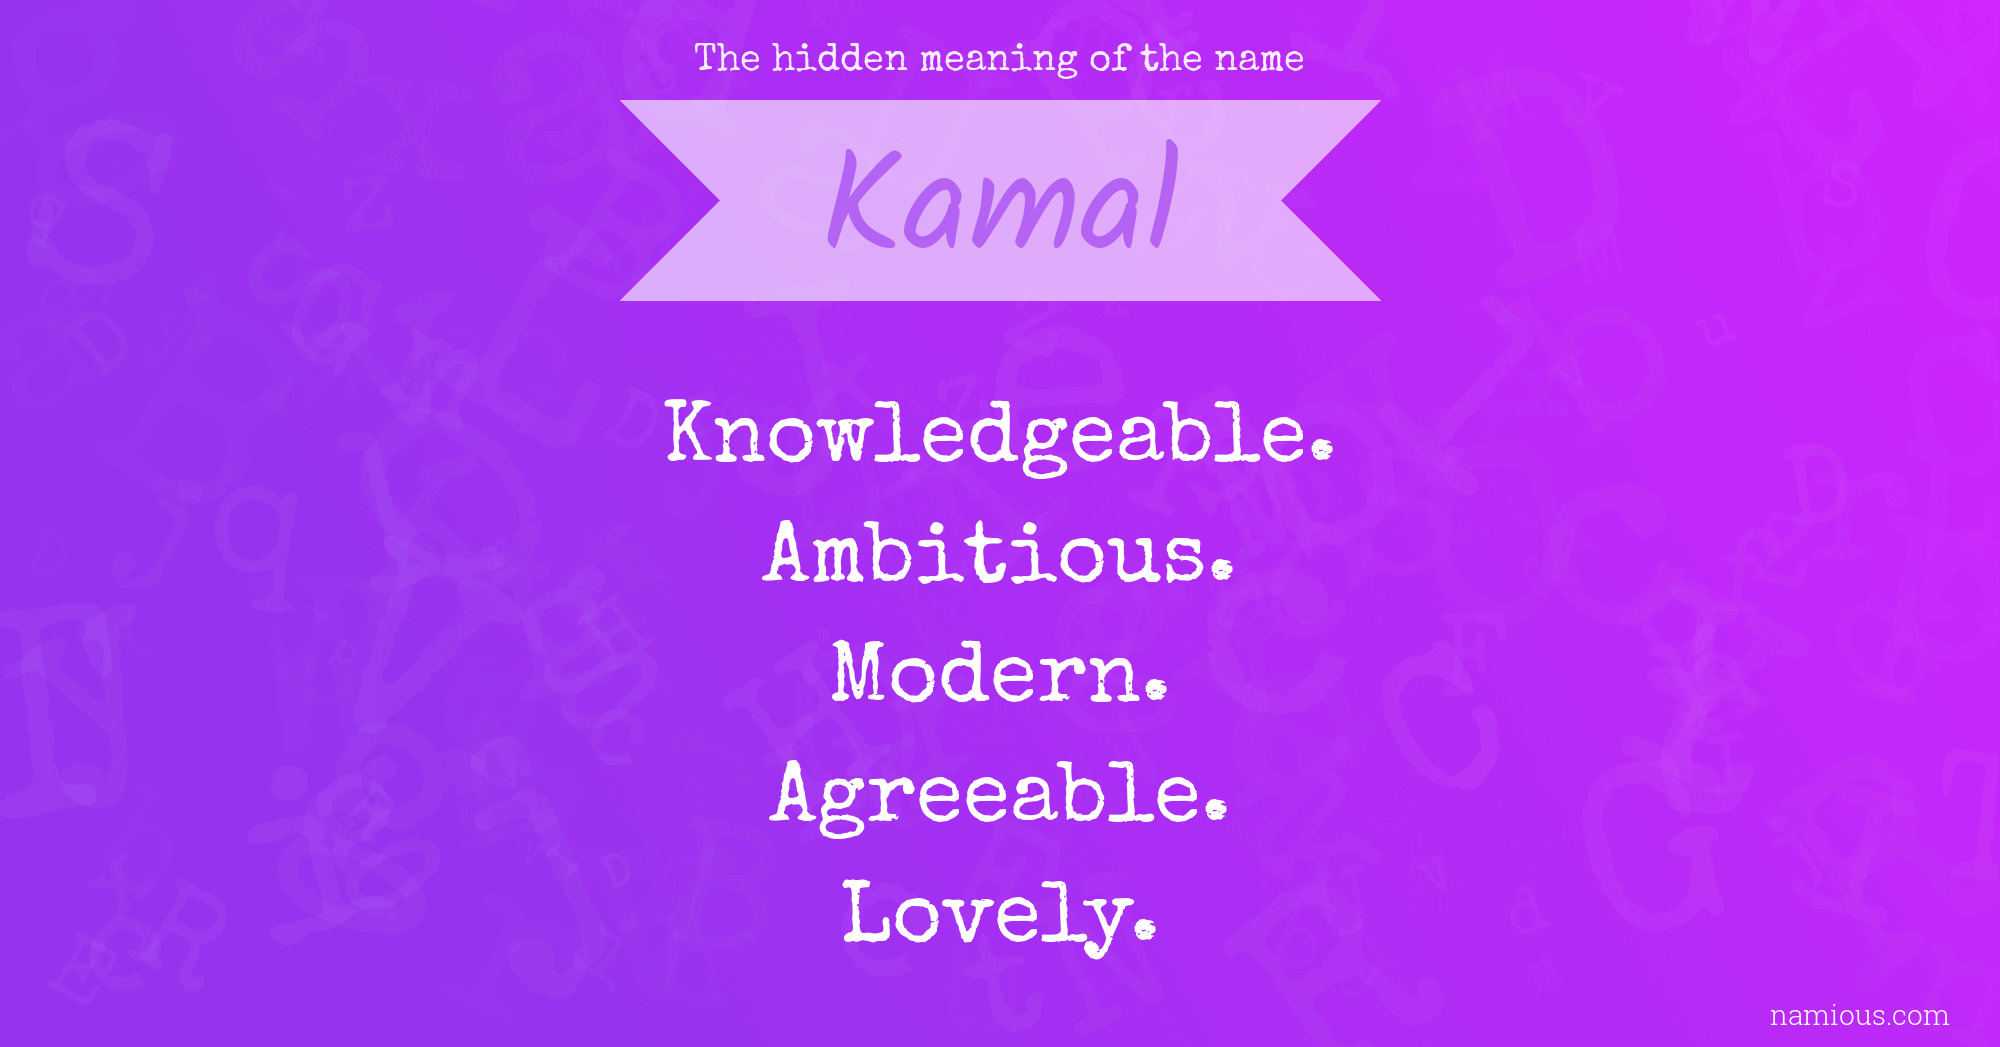 The hidden meaning of the name Kamal